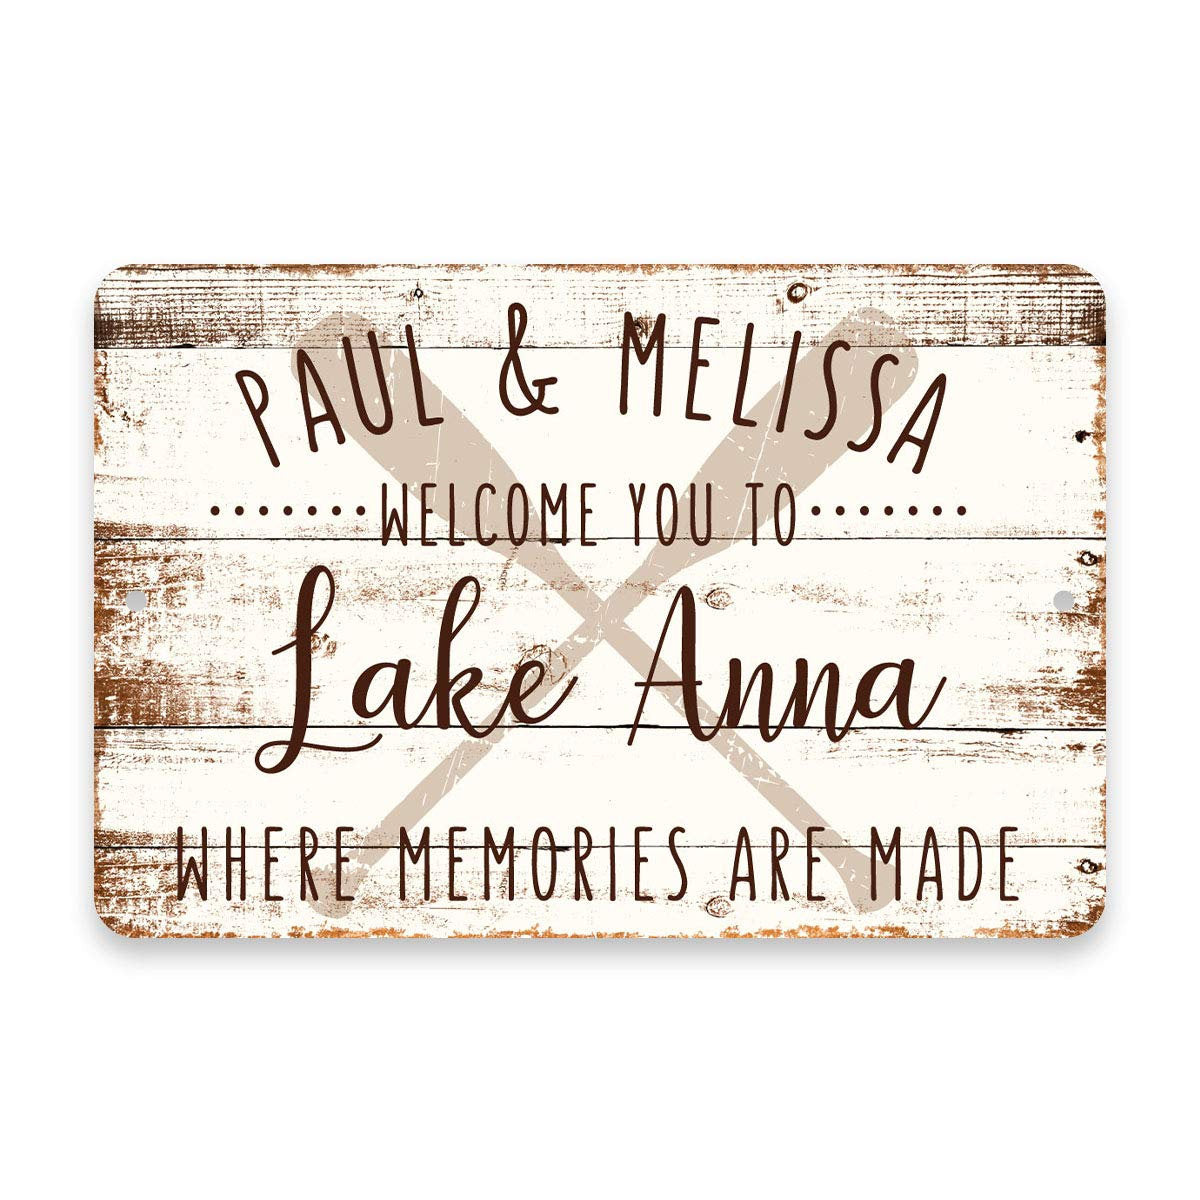 Personalized Welcome to Lake Anna Where Memories are Made Sign - 8 X 12 Metal Sign with Wood Look